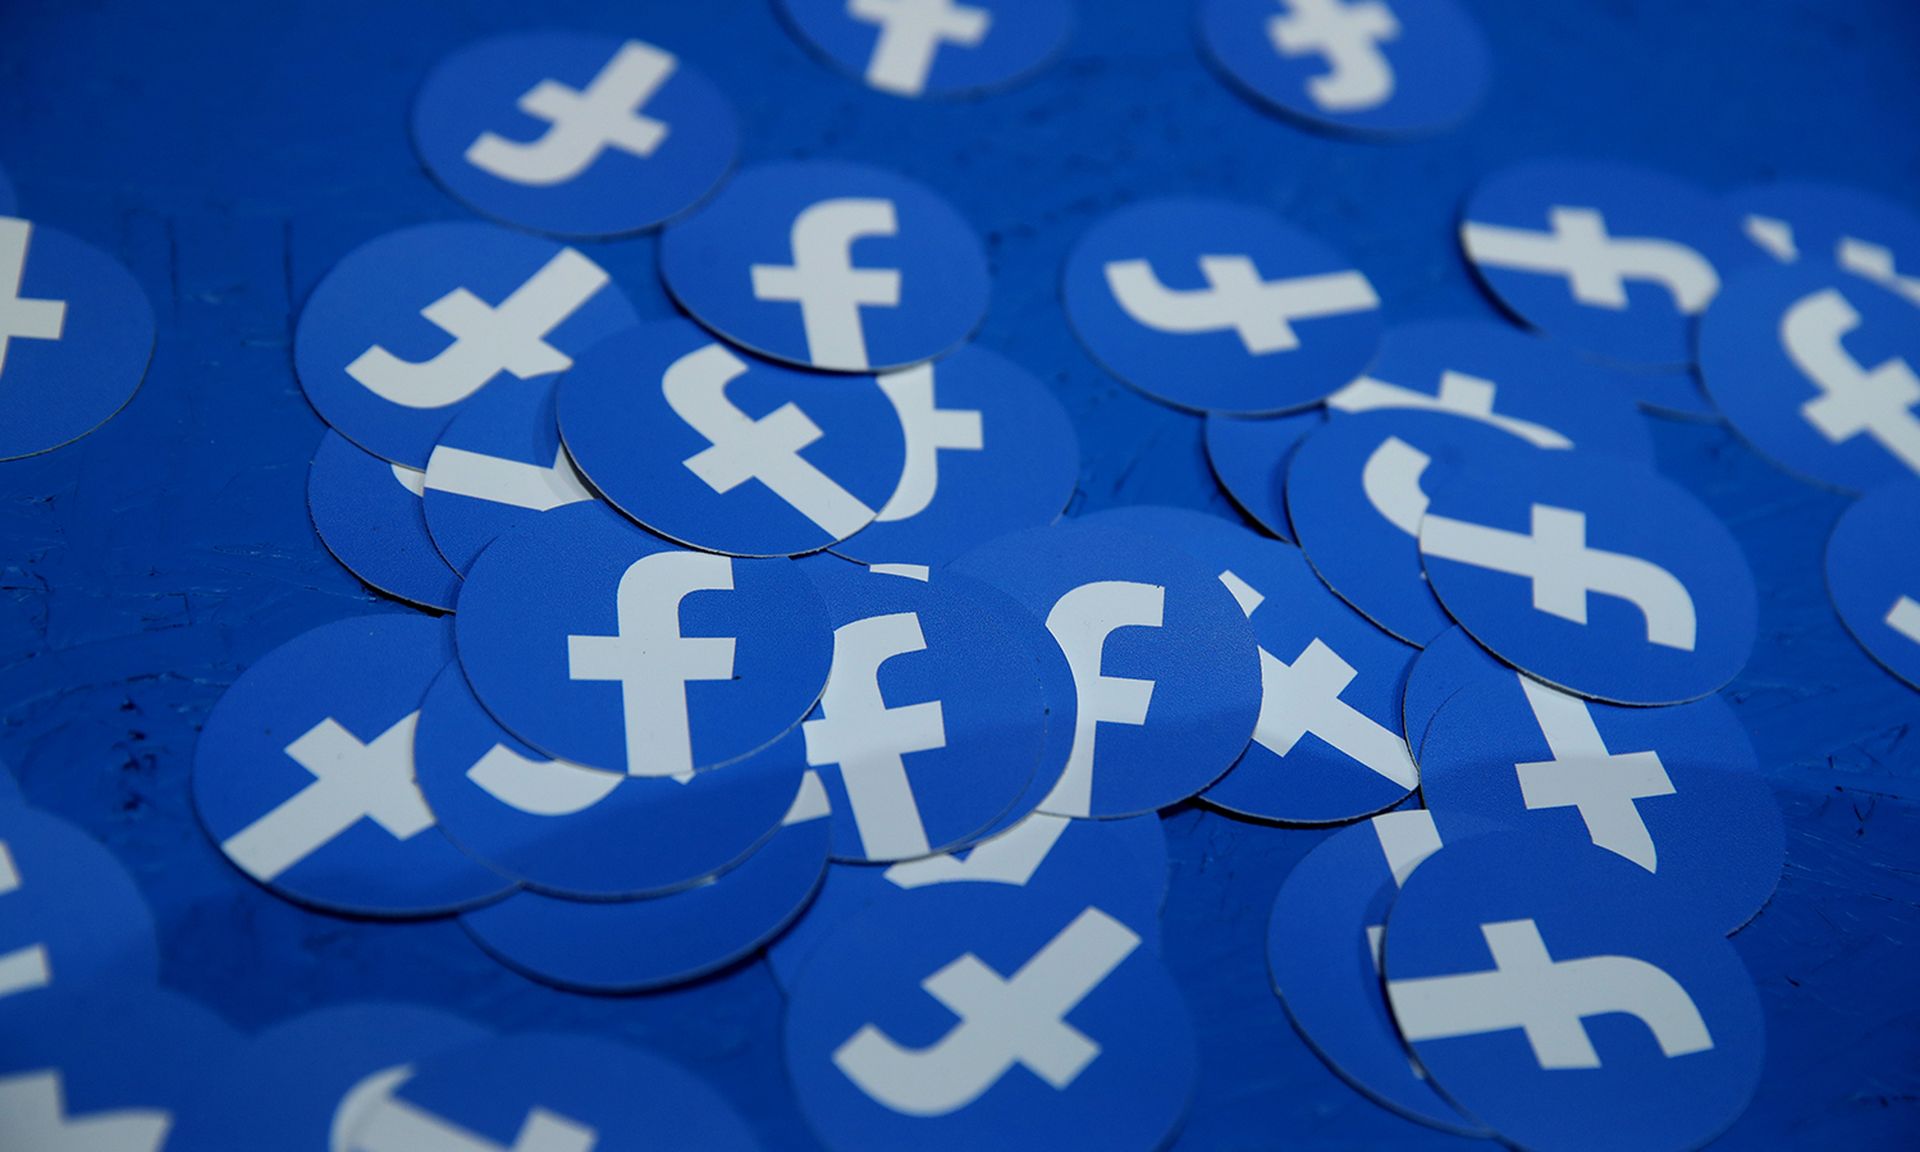 Facebook was the No. 1 impersonated brand used in phishing attacks in 2021, according to cybersecurity firm Vade. Pictured: Paper circles with the Facebook logo are displayed during the F8 Facebook Developers conference on April 30, 2019, in San Jose, Calif. (Photo by Justin Sullivan/Getty Images)